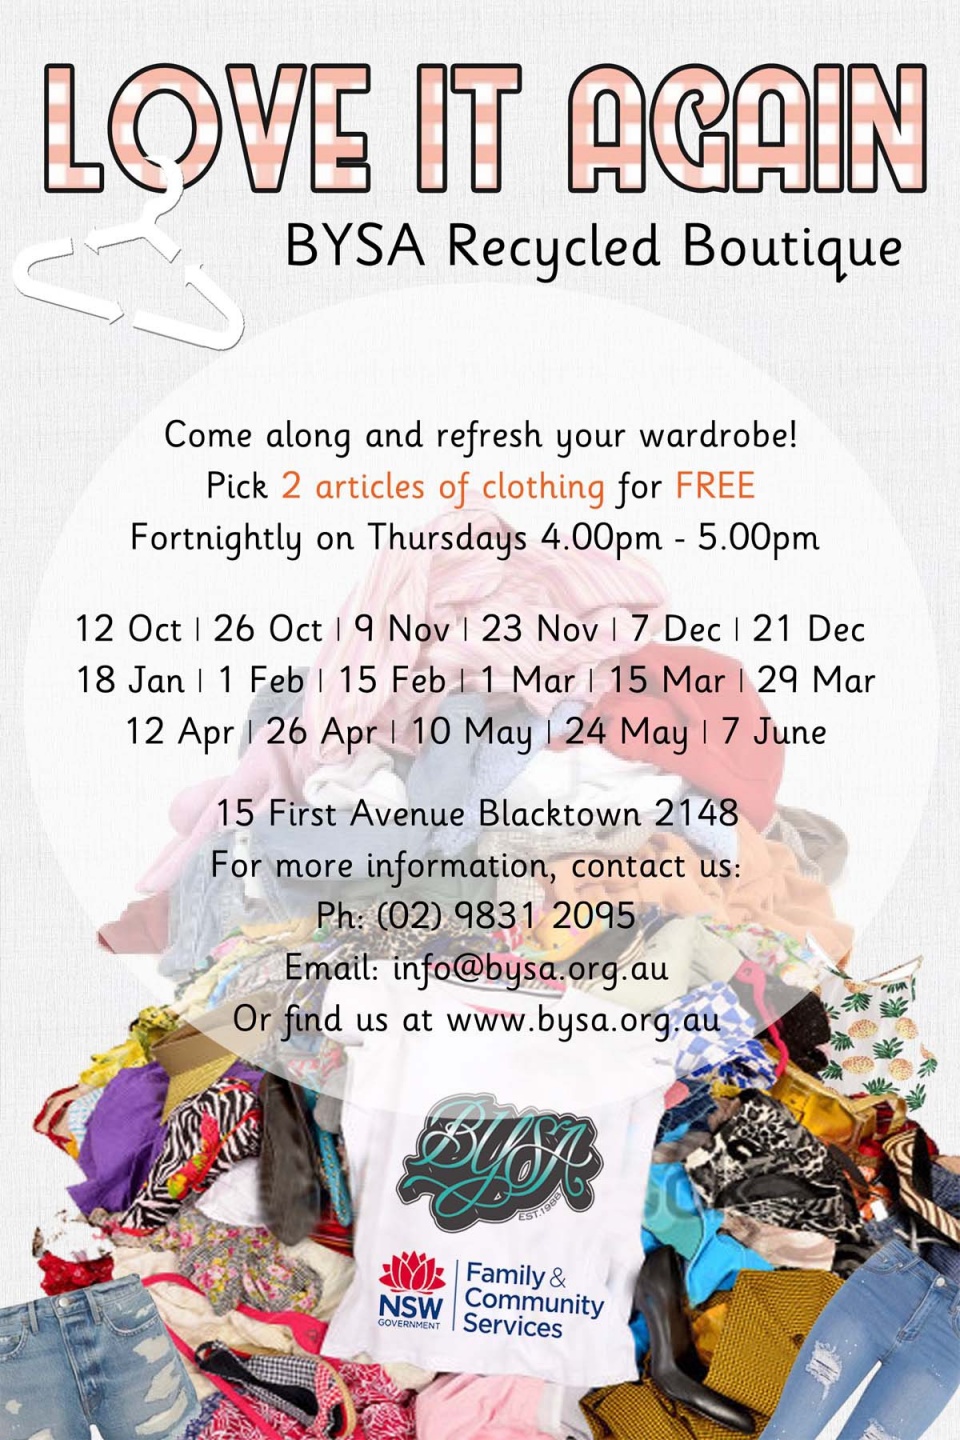 Recycled Boutique. Your FREE Thrift Shop. Come in and choose 2 free items.